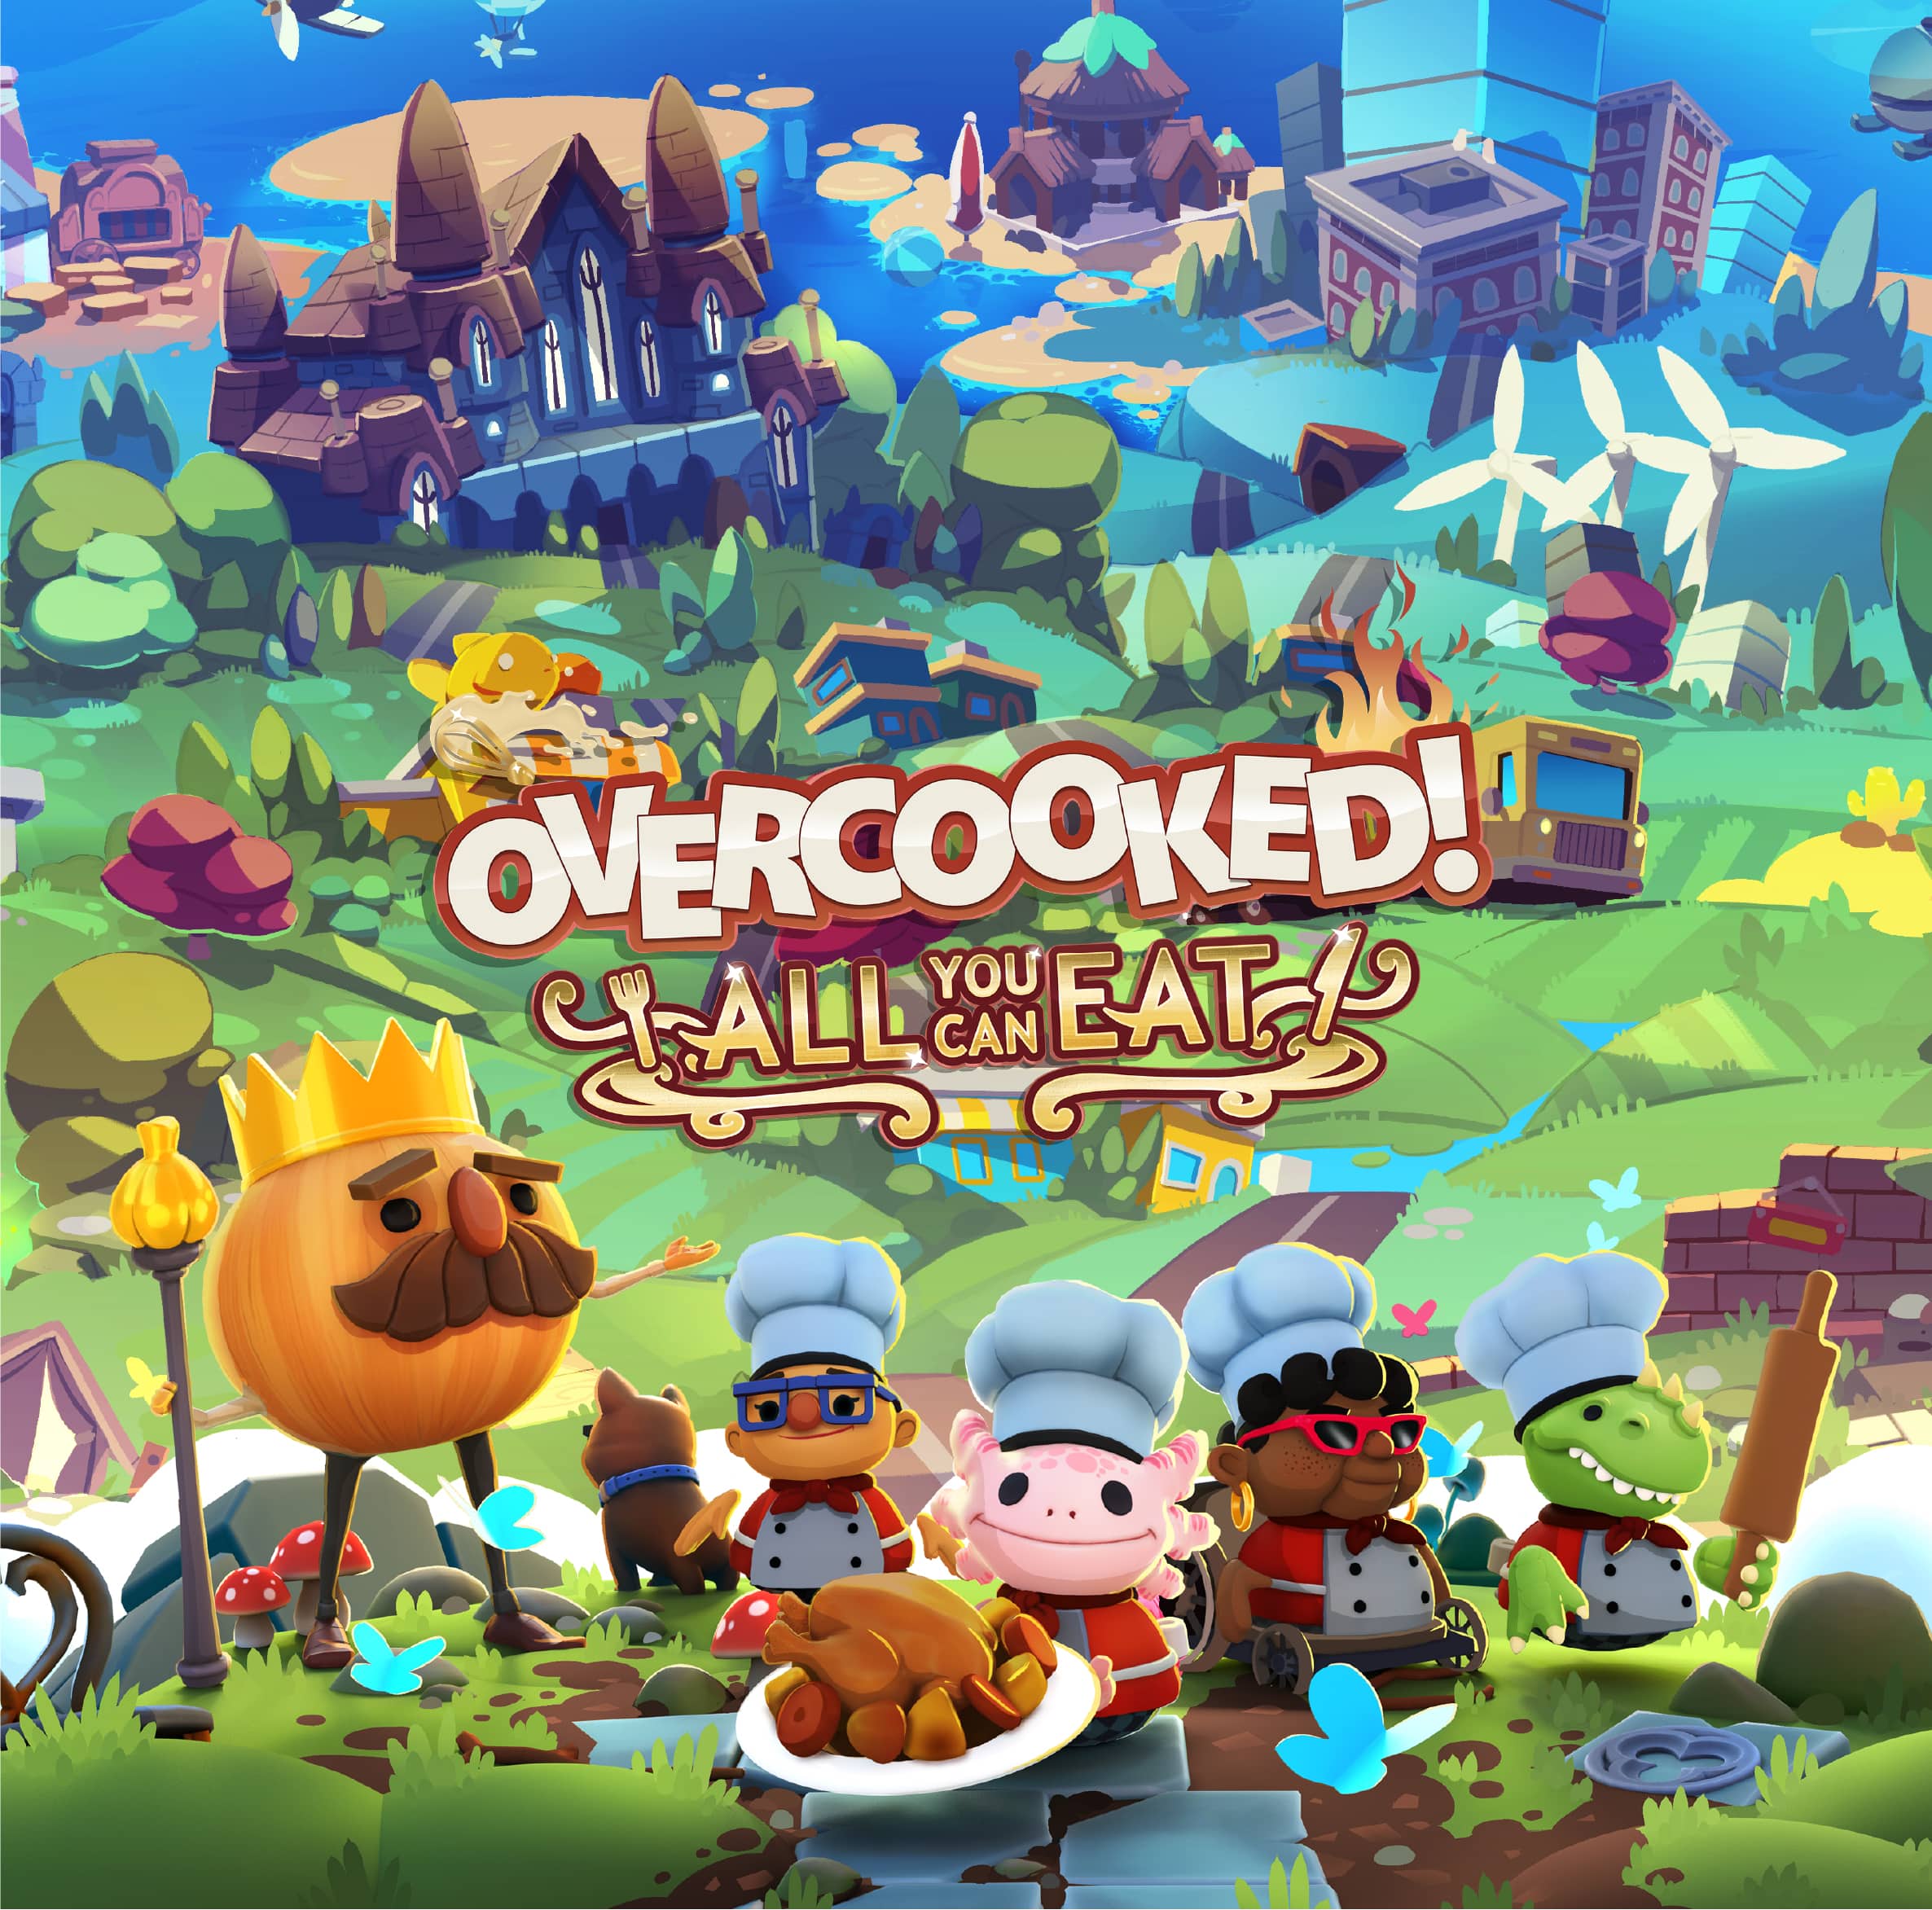 Overcooked! All You Can Eat next-gen overhaul compared to ...
